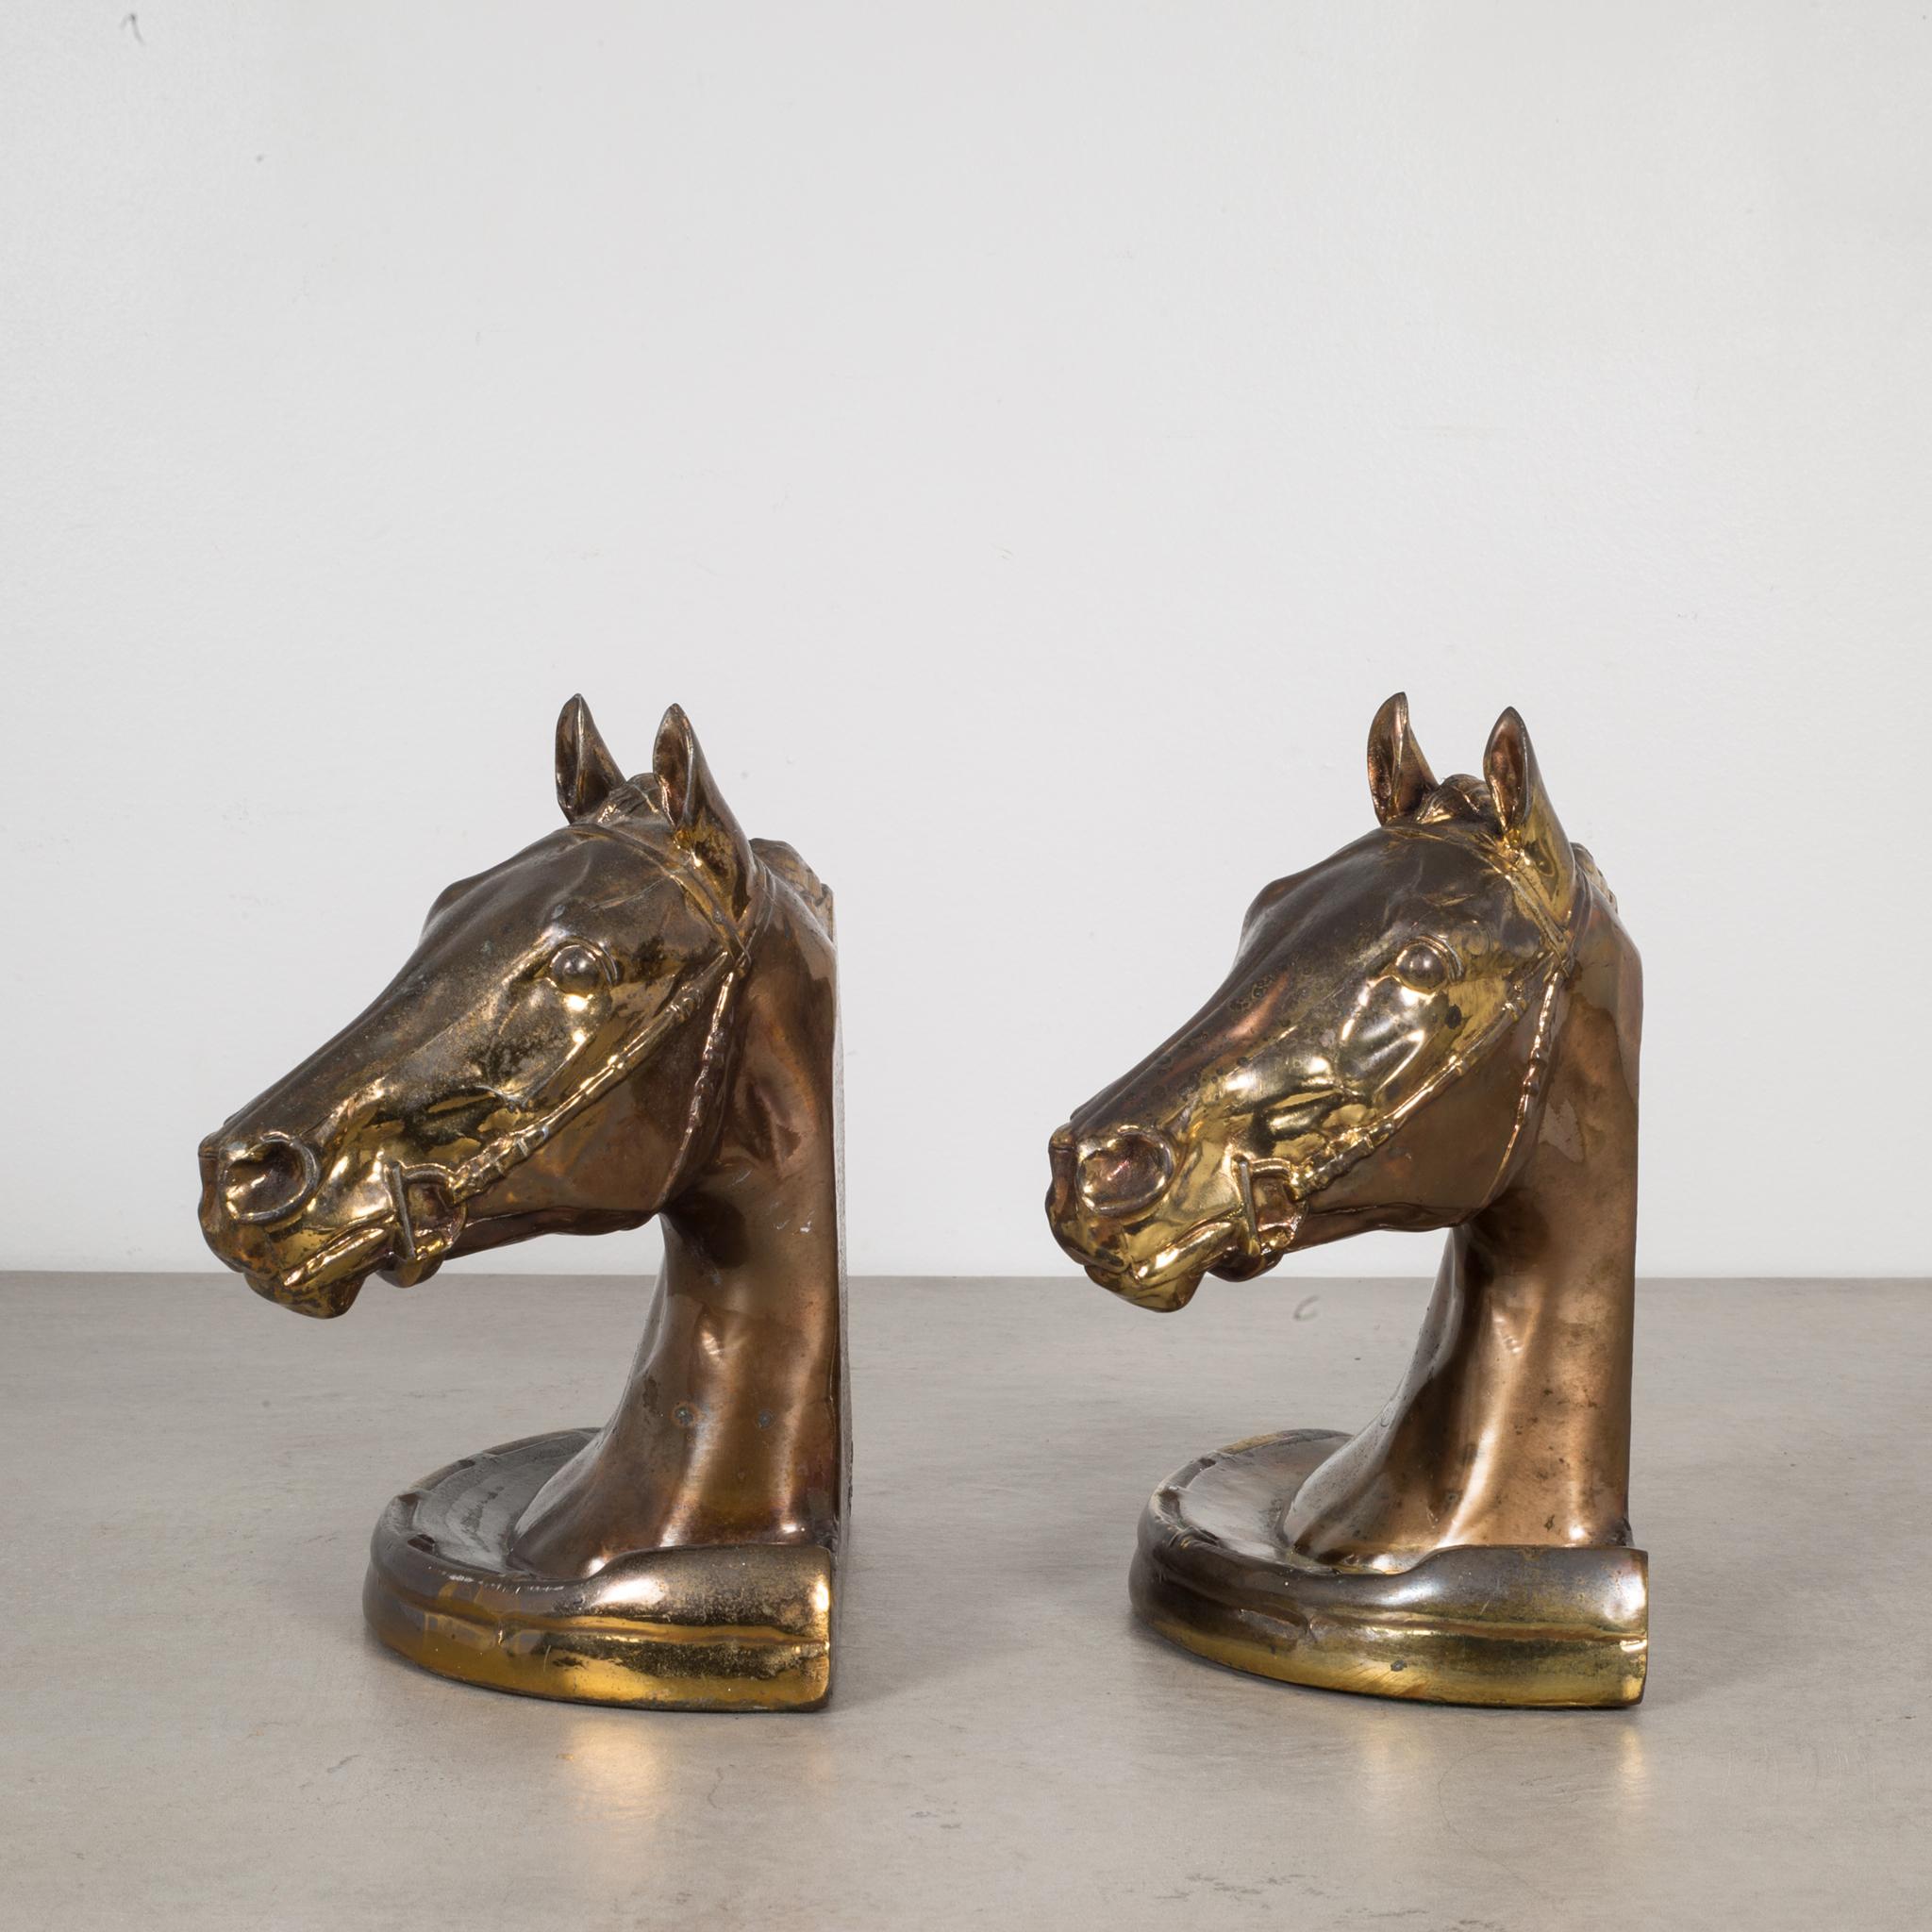 Art Deco Bronze Plated Horse Head Bookends by Glady's Brown and Dodge, circa 1930